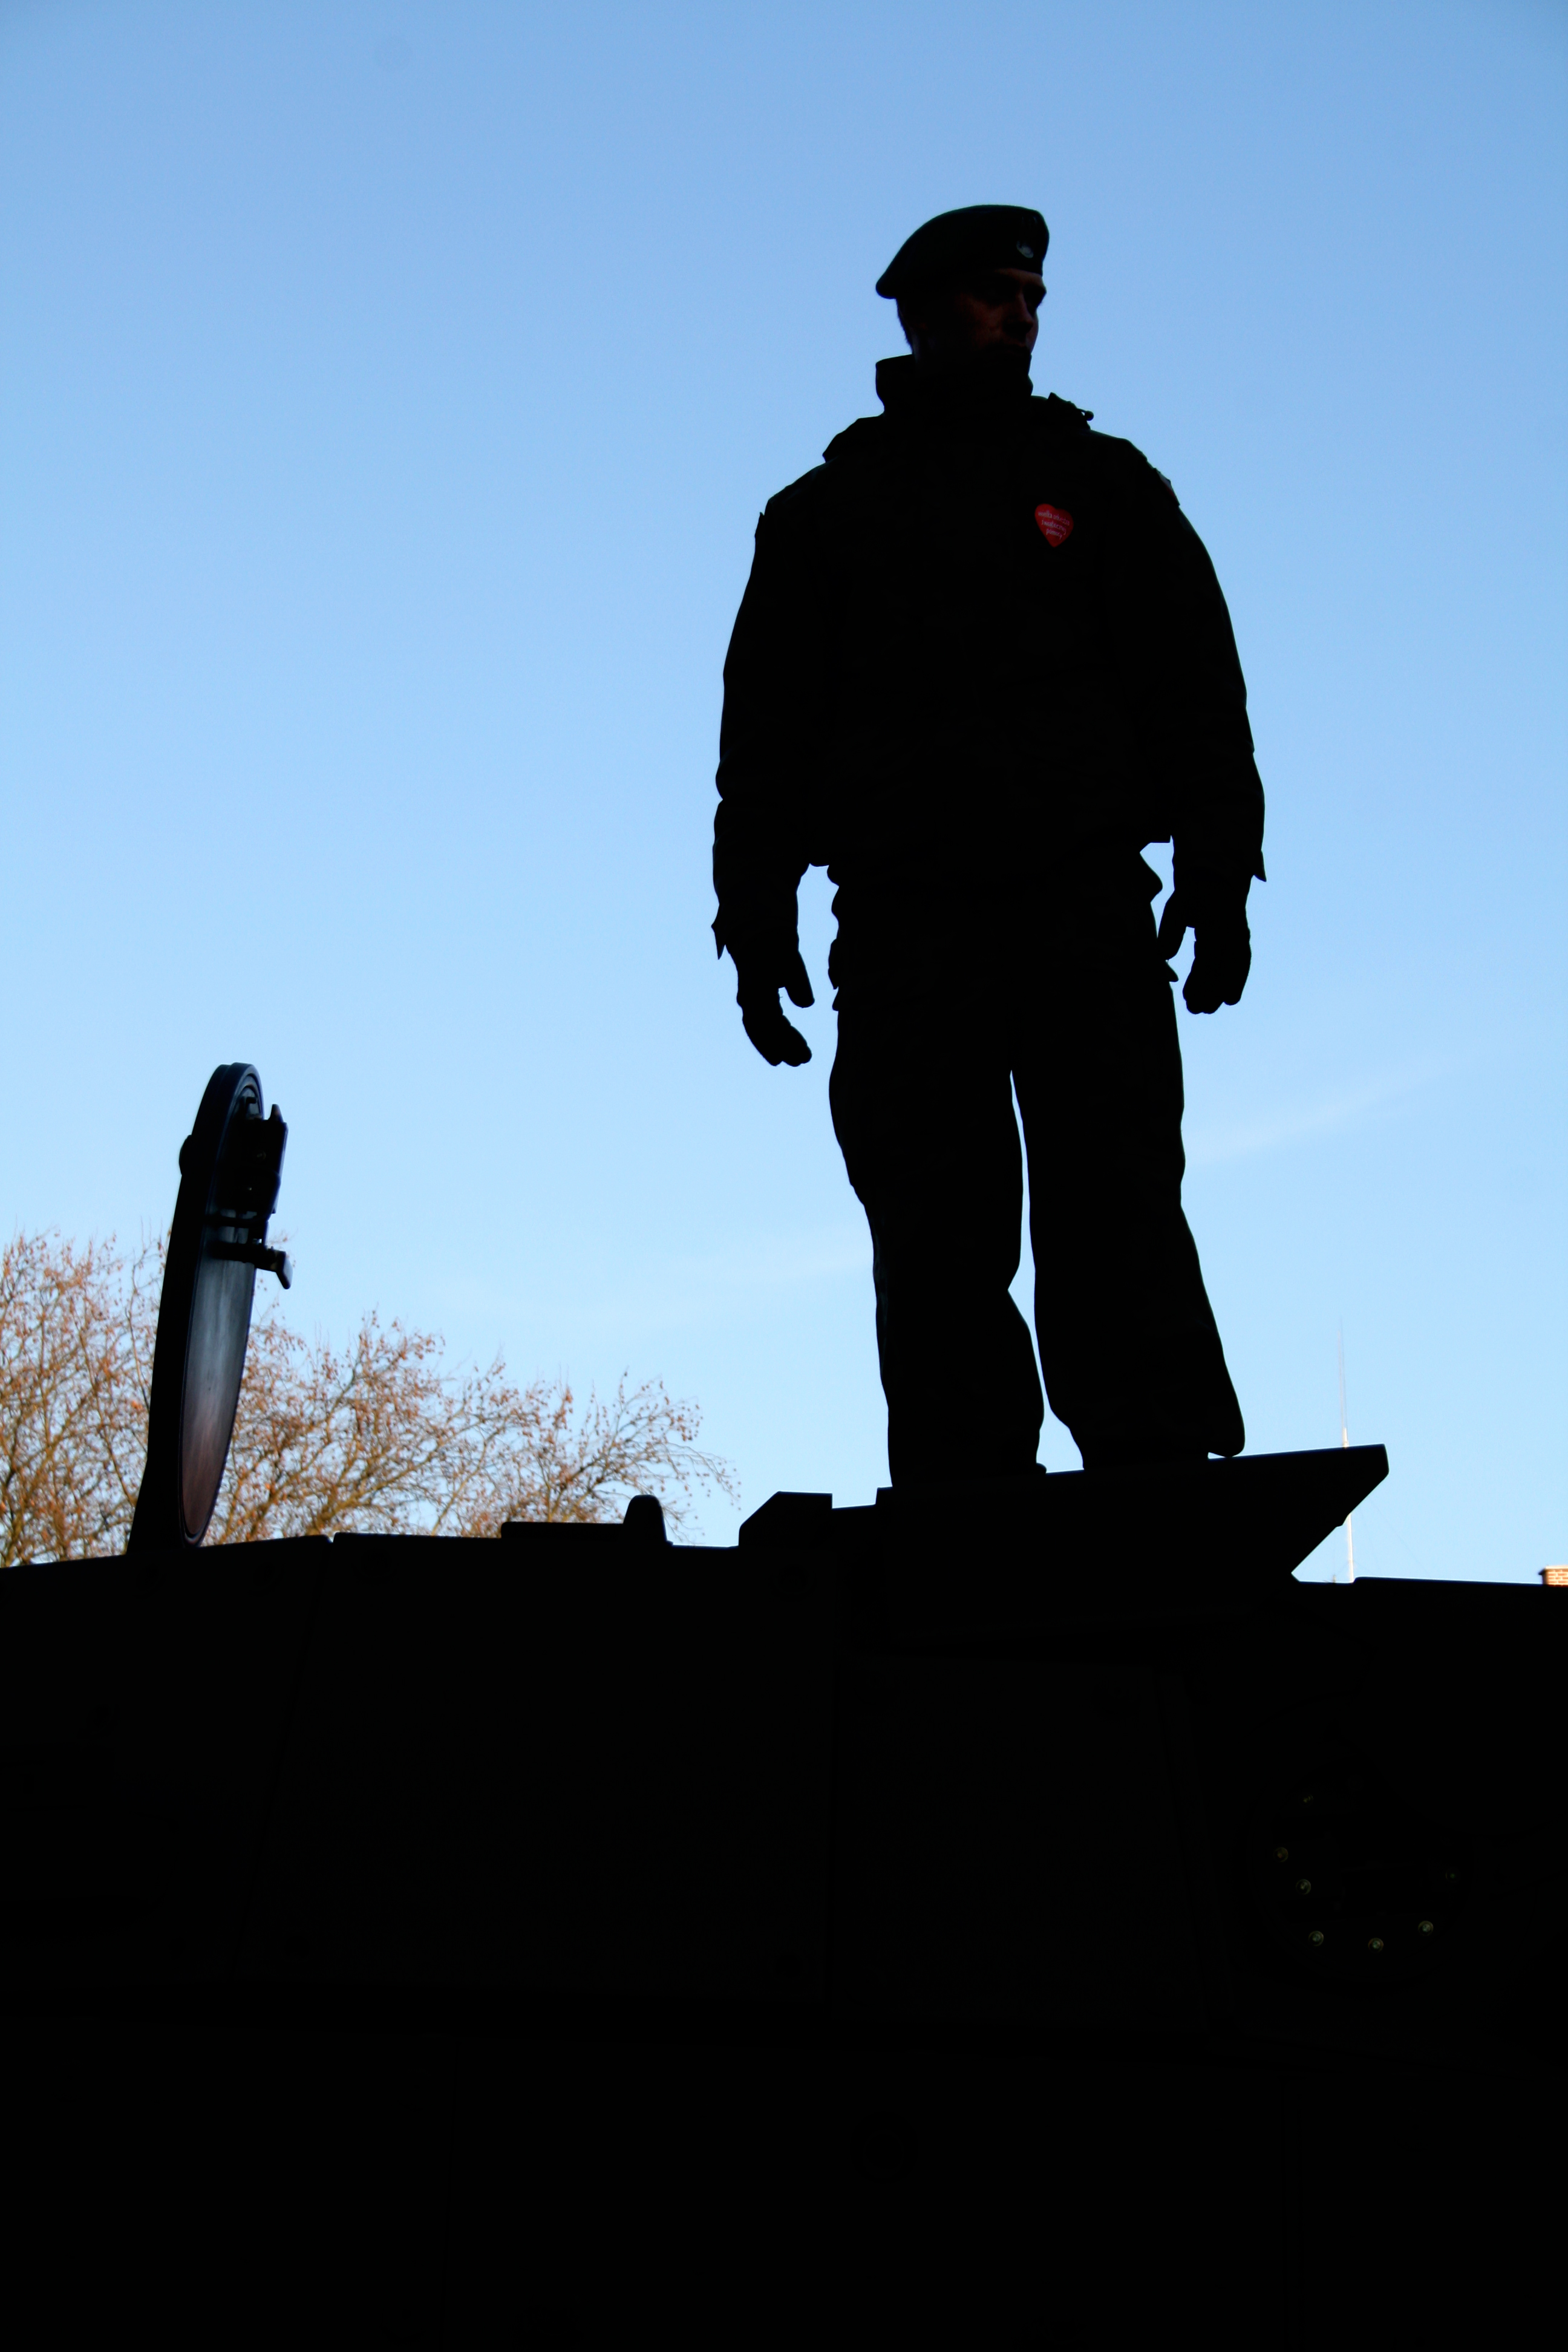 File:Soldier Silhouette.jpg - Wikimedia Commons